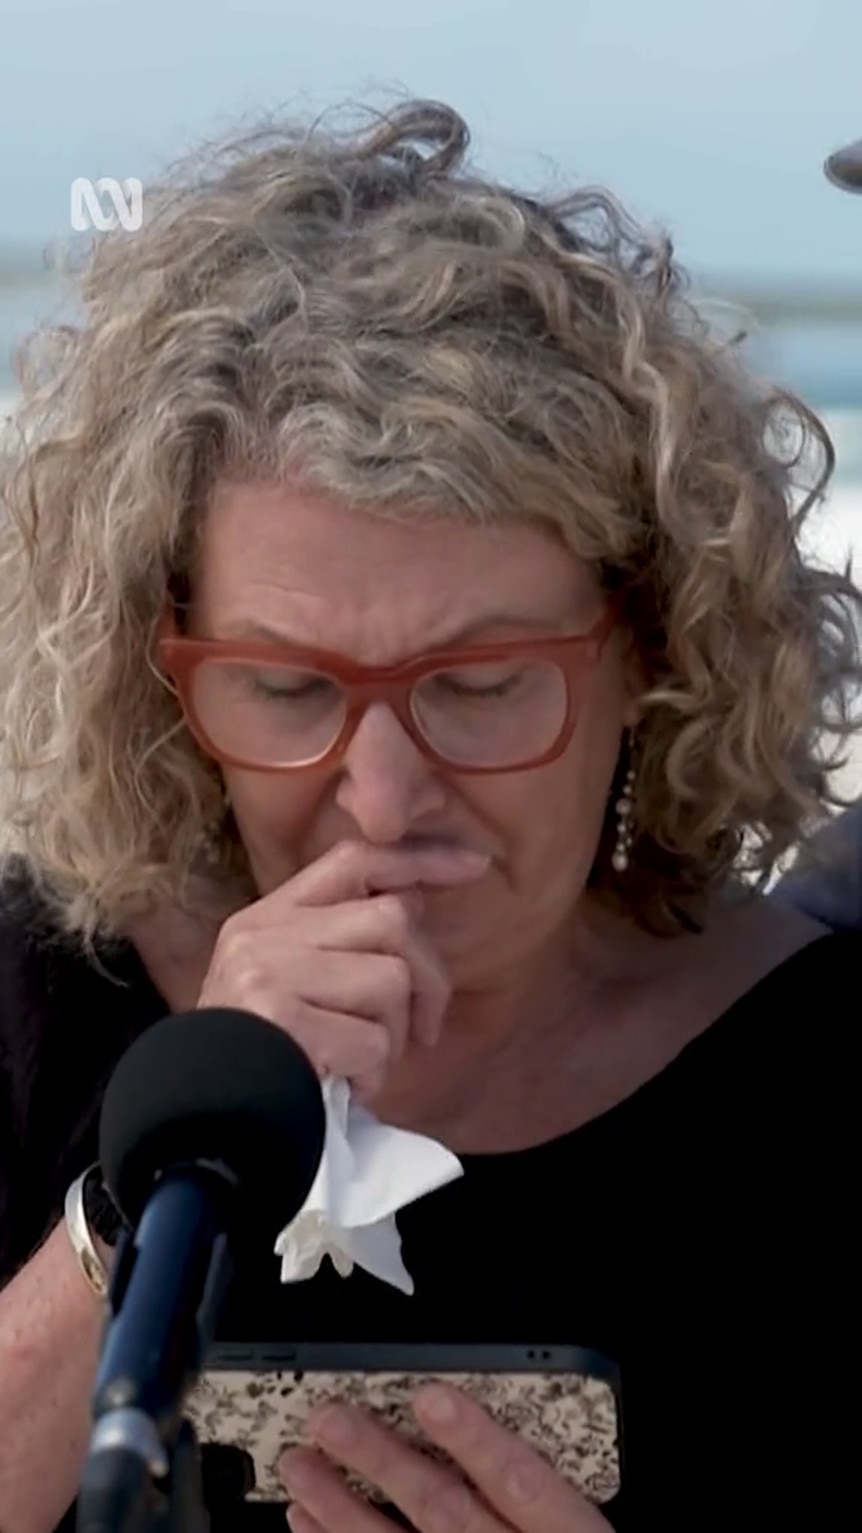 A middle-aged white woman with curly hair holds a tissue to her face as she looks down